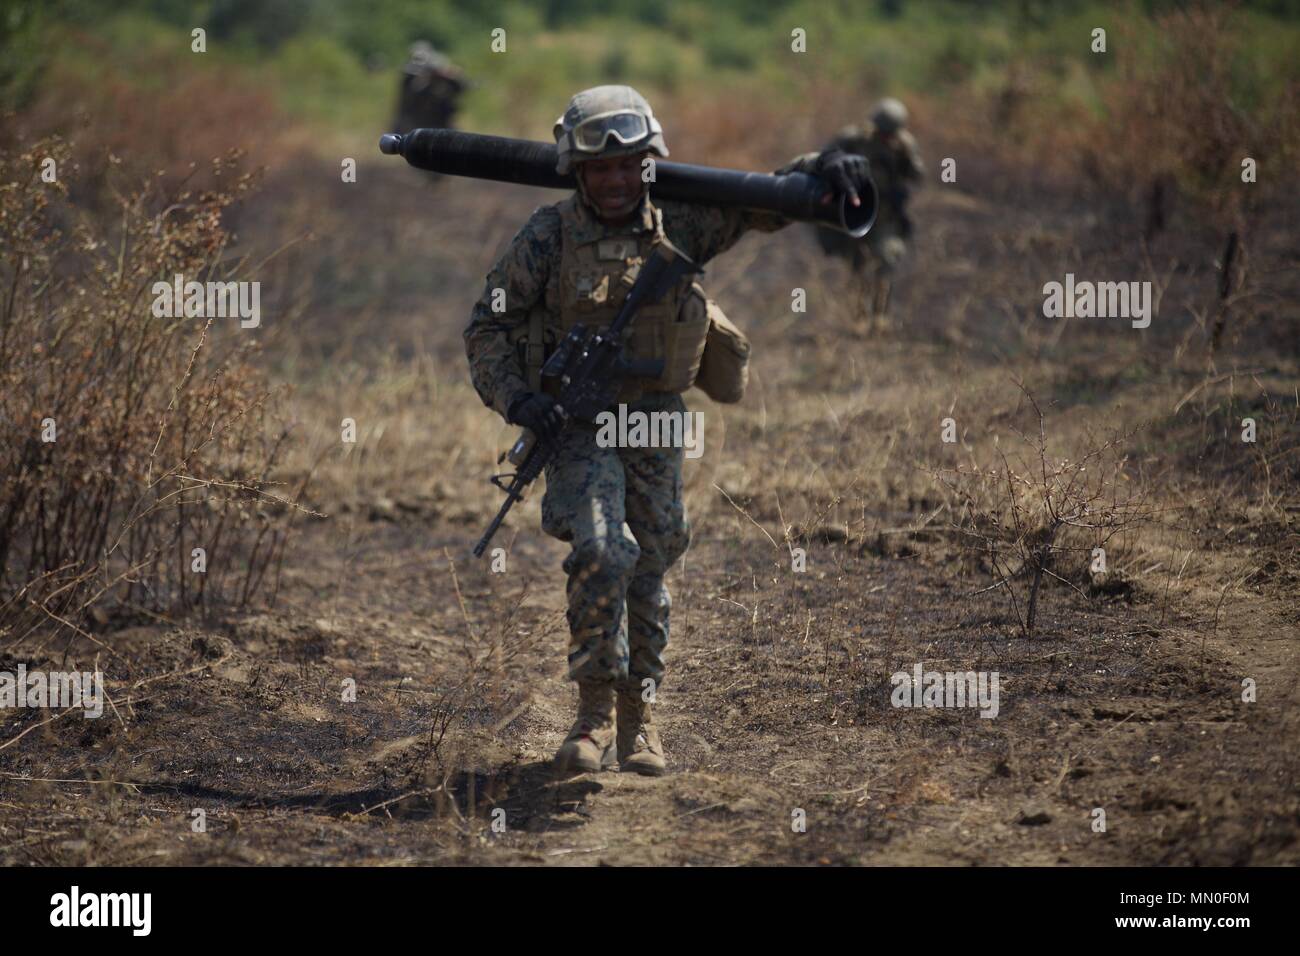 A U.S. Marine with Black Sea Rotational Force 17.1 carries a 81 milimeter mortar tube during an occupy by force rehearsal aboard Novo Selo Training Area, Bulgaria, Aug. 2, 2017. This range was a part of Exercise Platinum Lion 17.2, a multinational exercise to build relationships with NATO Allies and partner nations through combined-arms training. (U.S. Marine Corps photo by Pfc. Sarah N. Petrock) Stock Photo